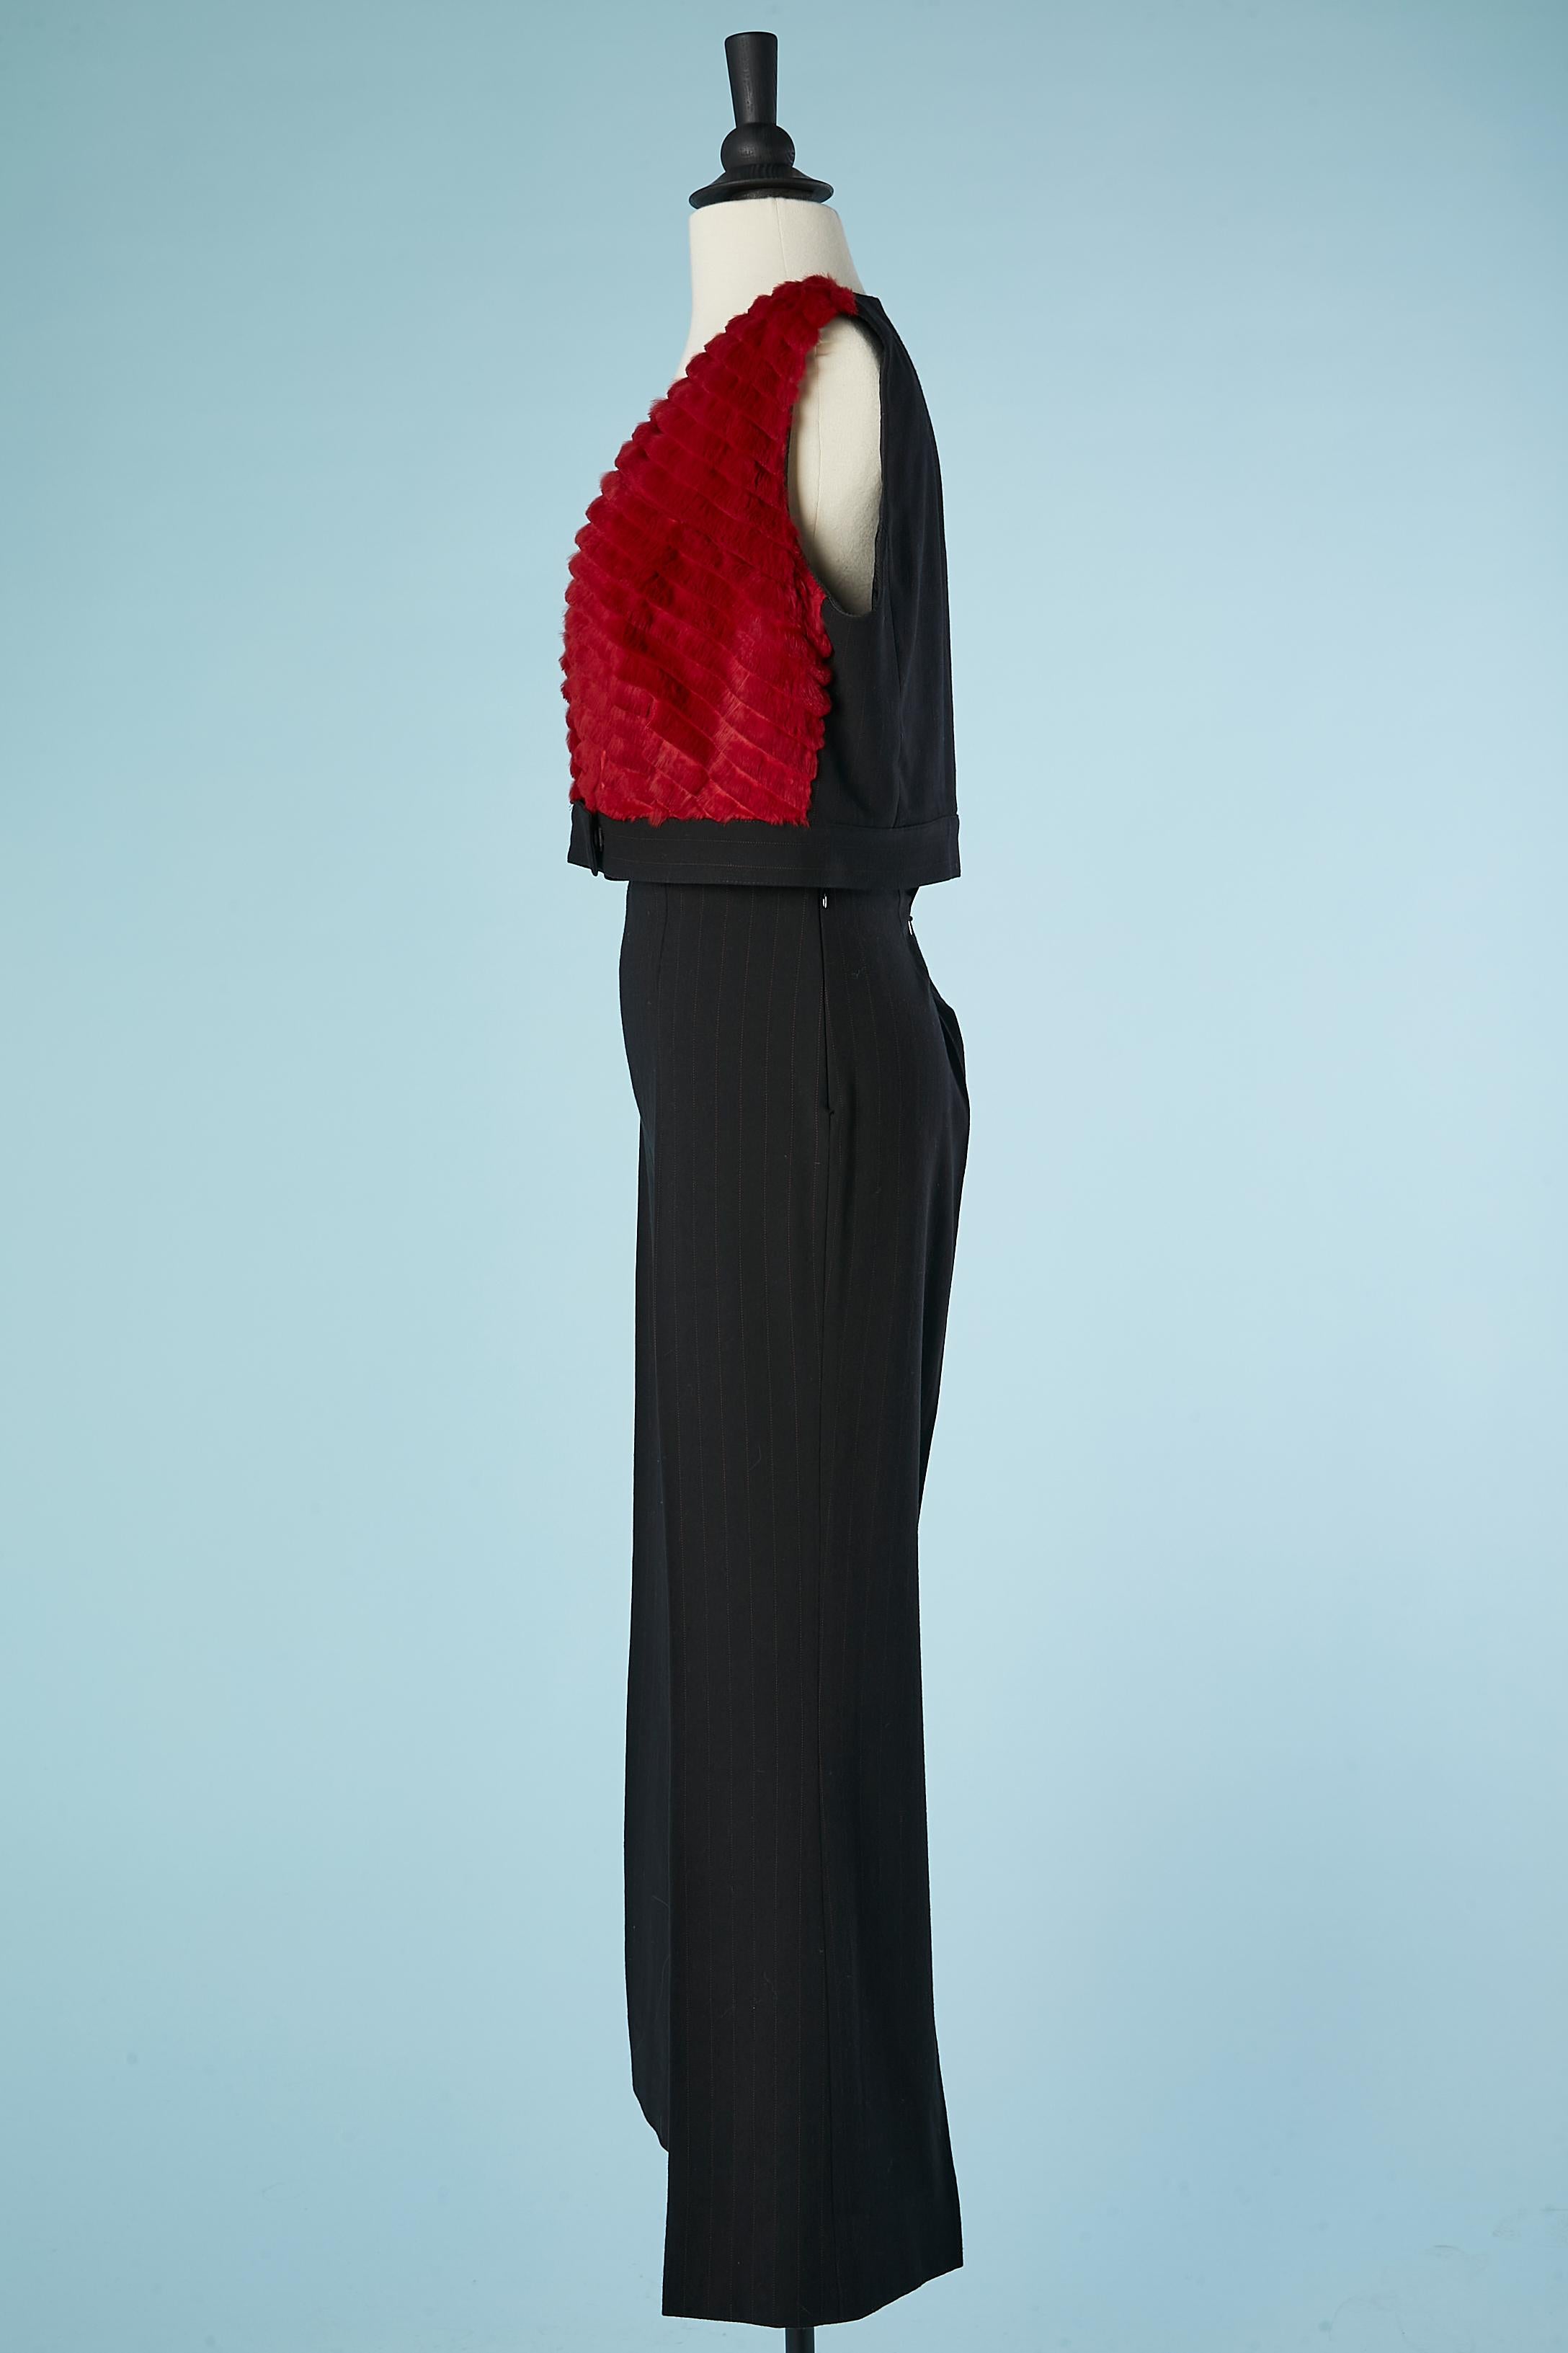 Black wool and red pin-stripe trouser-suit and fur vest Gianfranco Ferré Studio For Sale 6